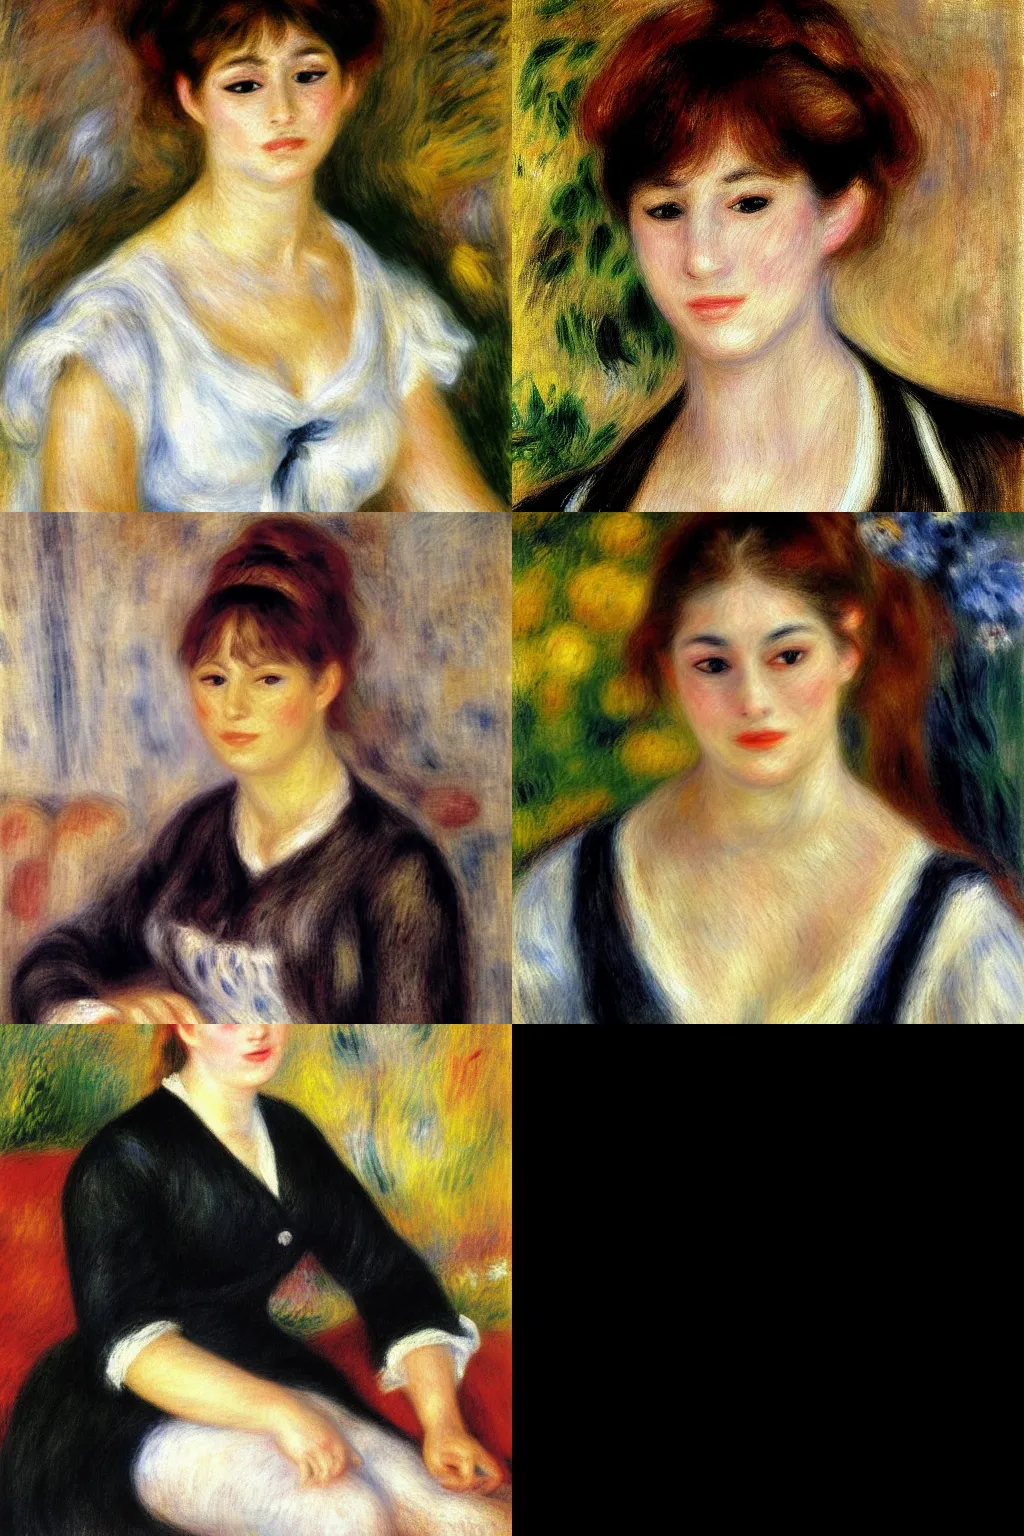 Prompt: an hd painting of a woman by pierre - auguste renoir. she has straight long dark brown hair, parted in the middle. she has large dark brown eyes, a small refined nose, and thin lips. she is wearing a sleeveless white blouse, a pair of dark brown capris, and black loafers.